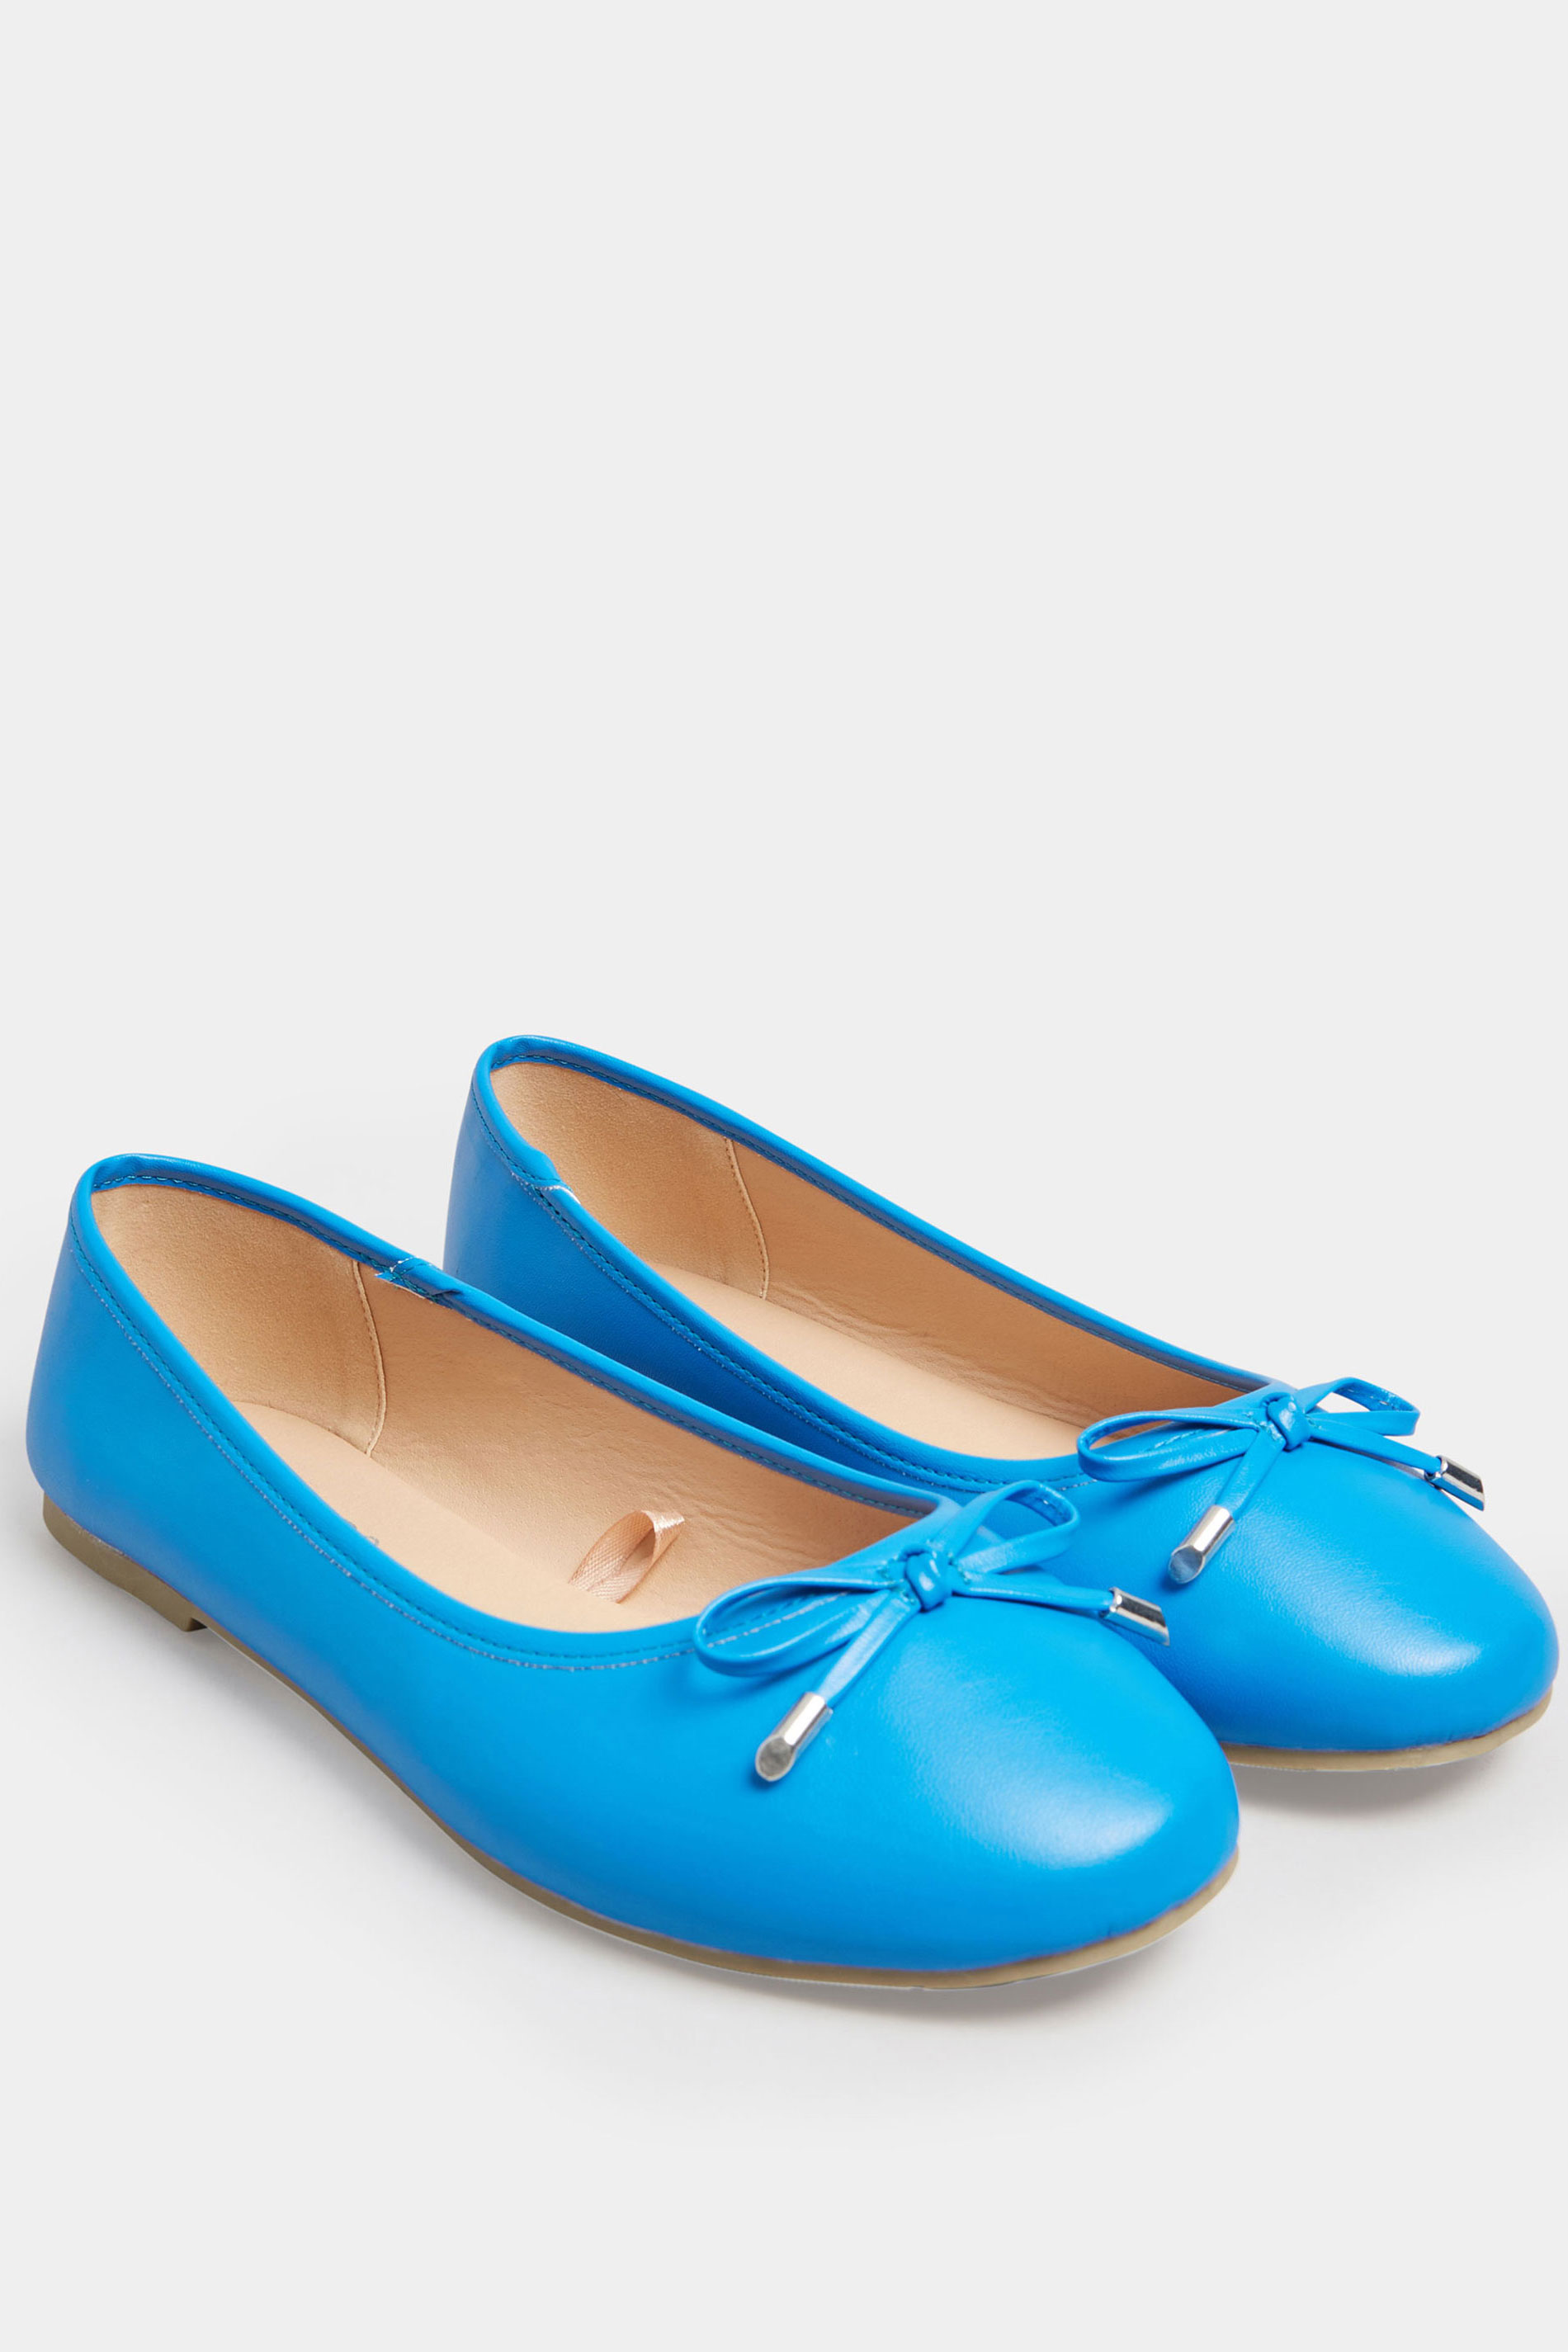 Blue Ballerina Pumps In Wide E Fit & Extra Wide EEE Fit | Yours Clothing 2